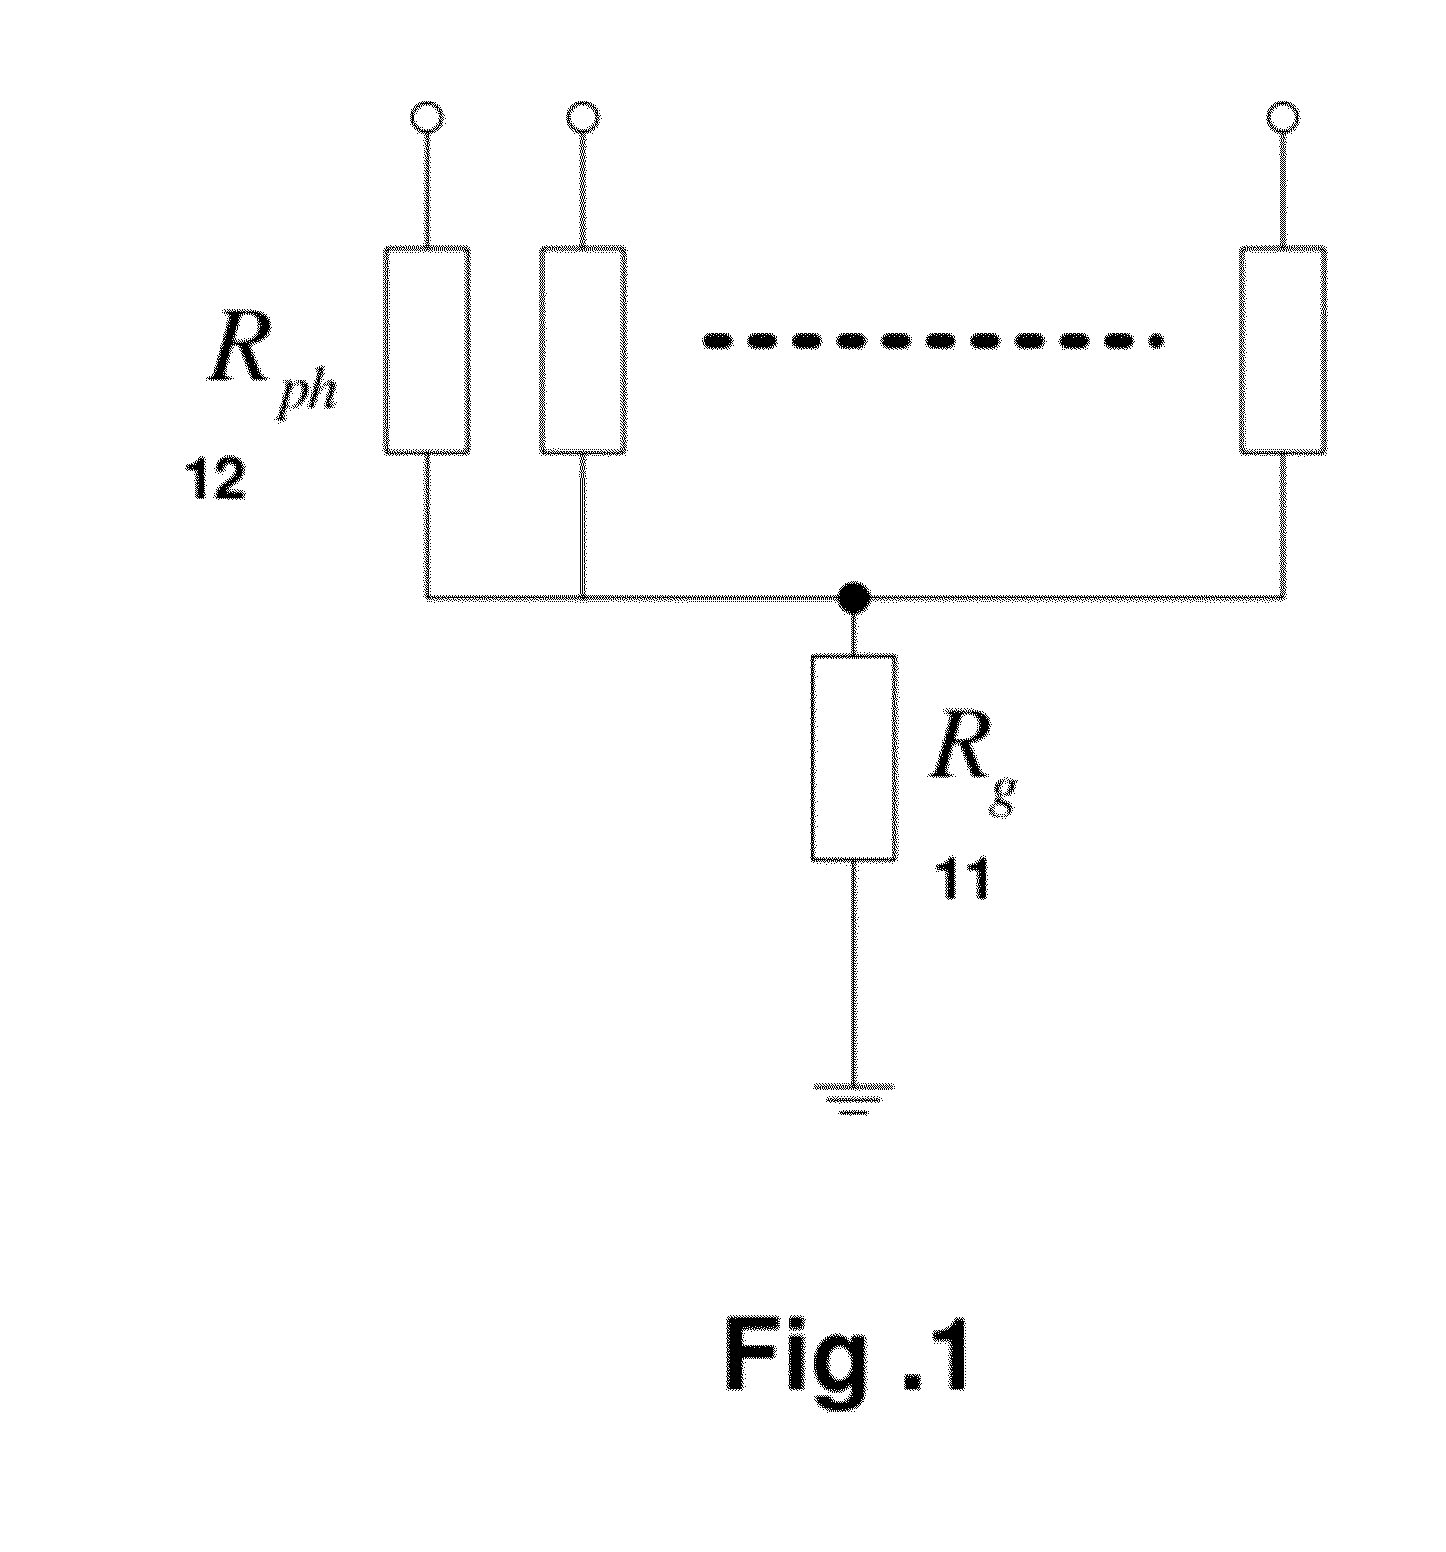 Method for Identifying Type of Fault on Power Line